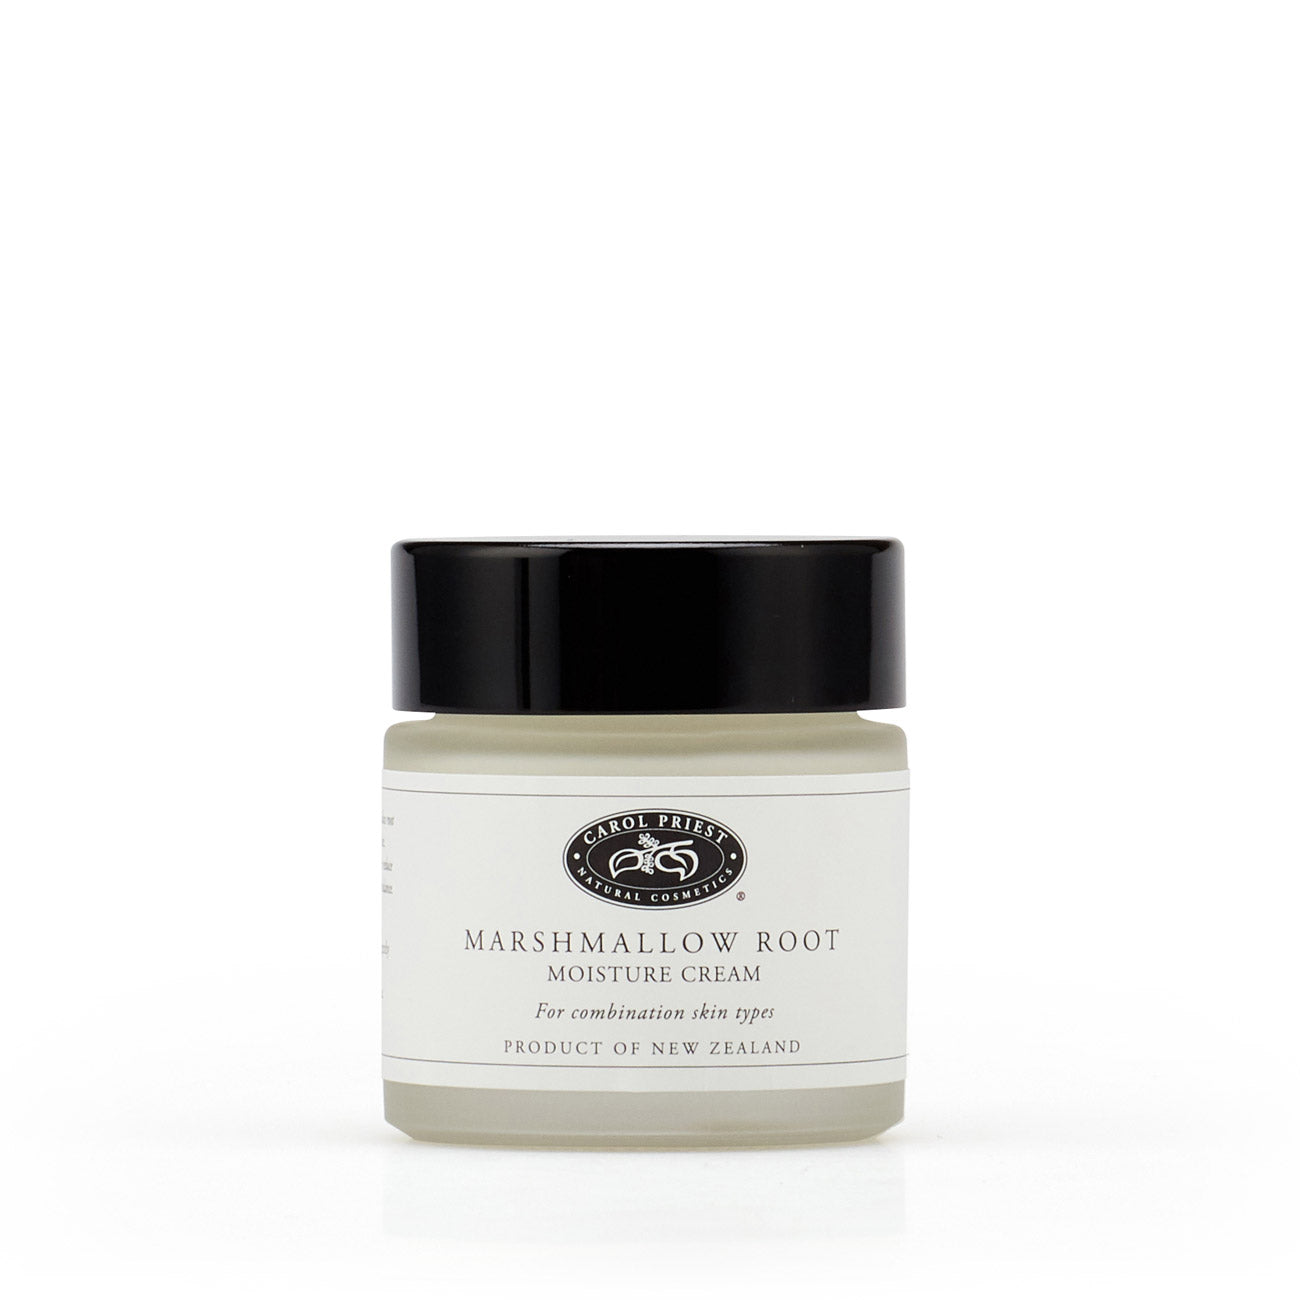 photo showcasing the front of Marshmallow Root Day Moisture Cream by Carol Priest, a natural, organic cosmetic